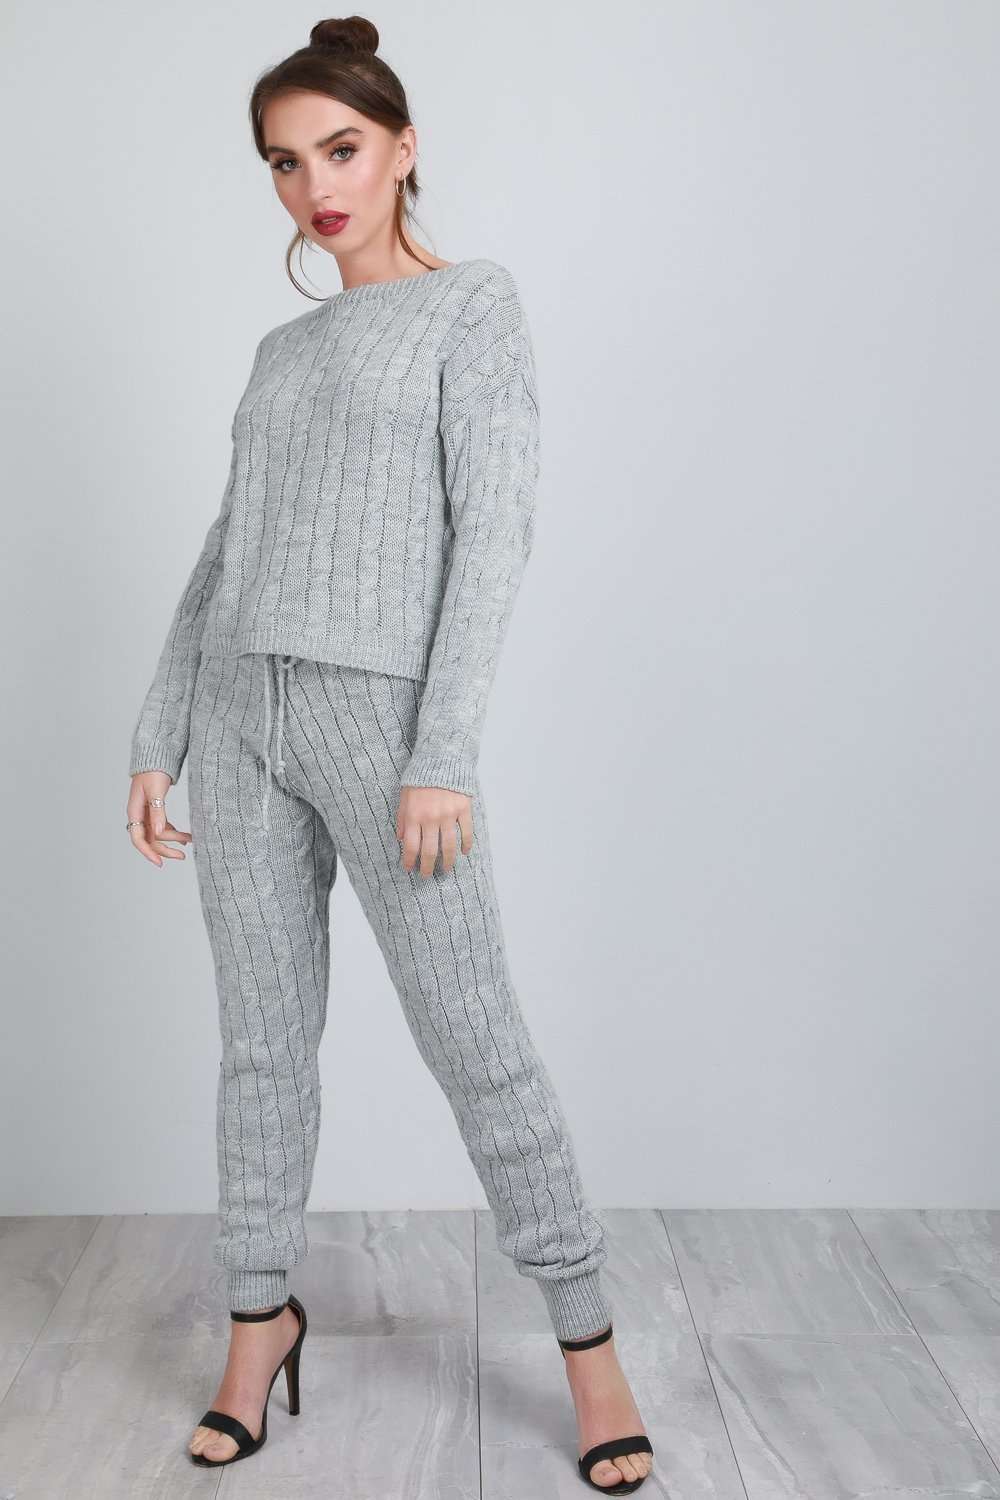 Hayley Chunky Knitted Lounge Wear Coord - bejealous-com